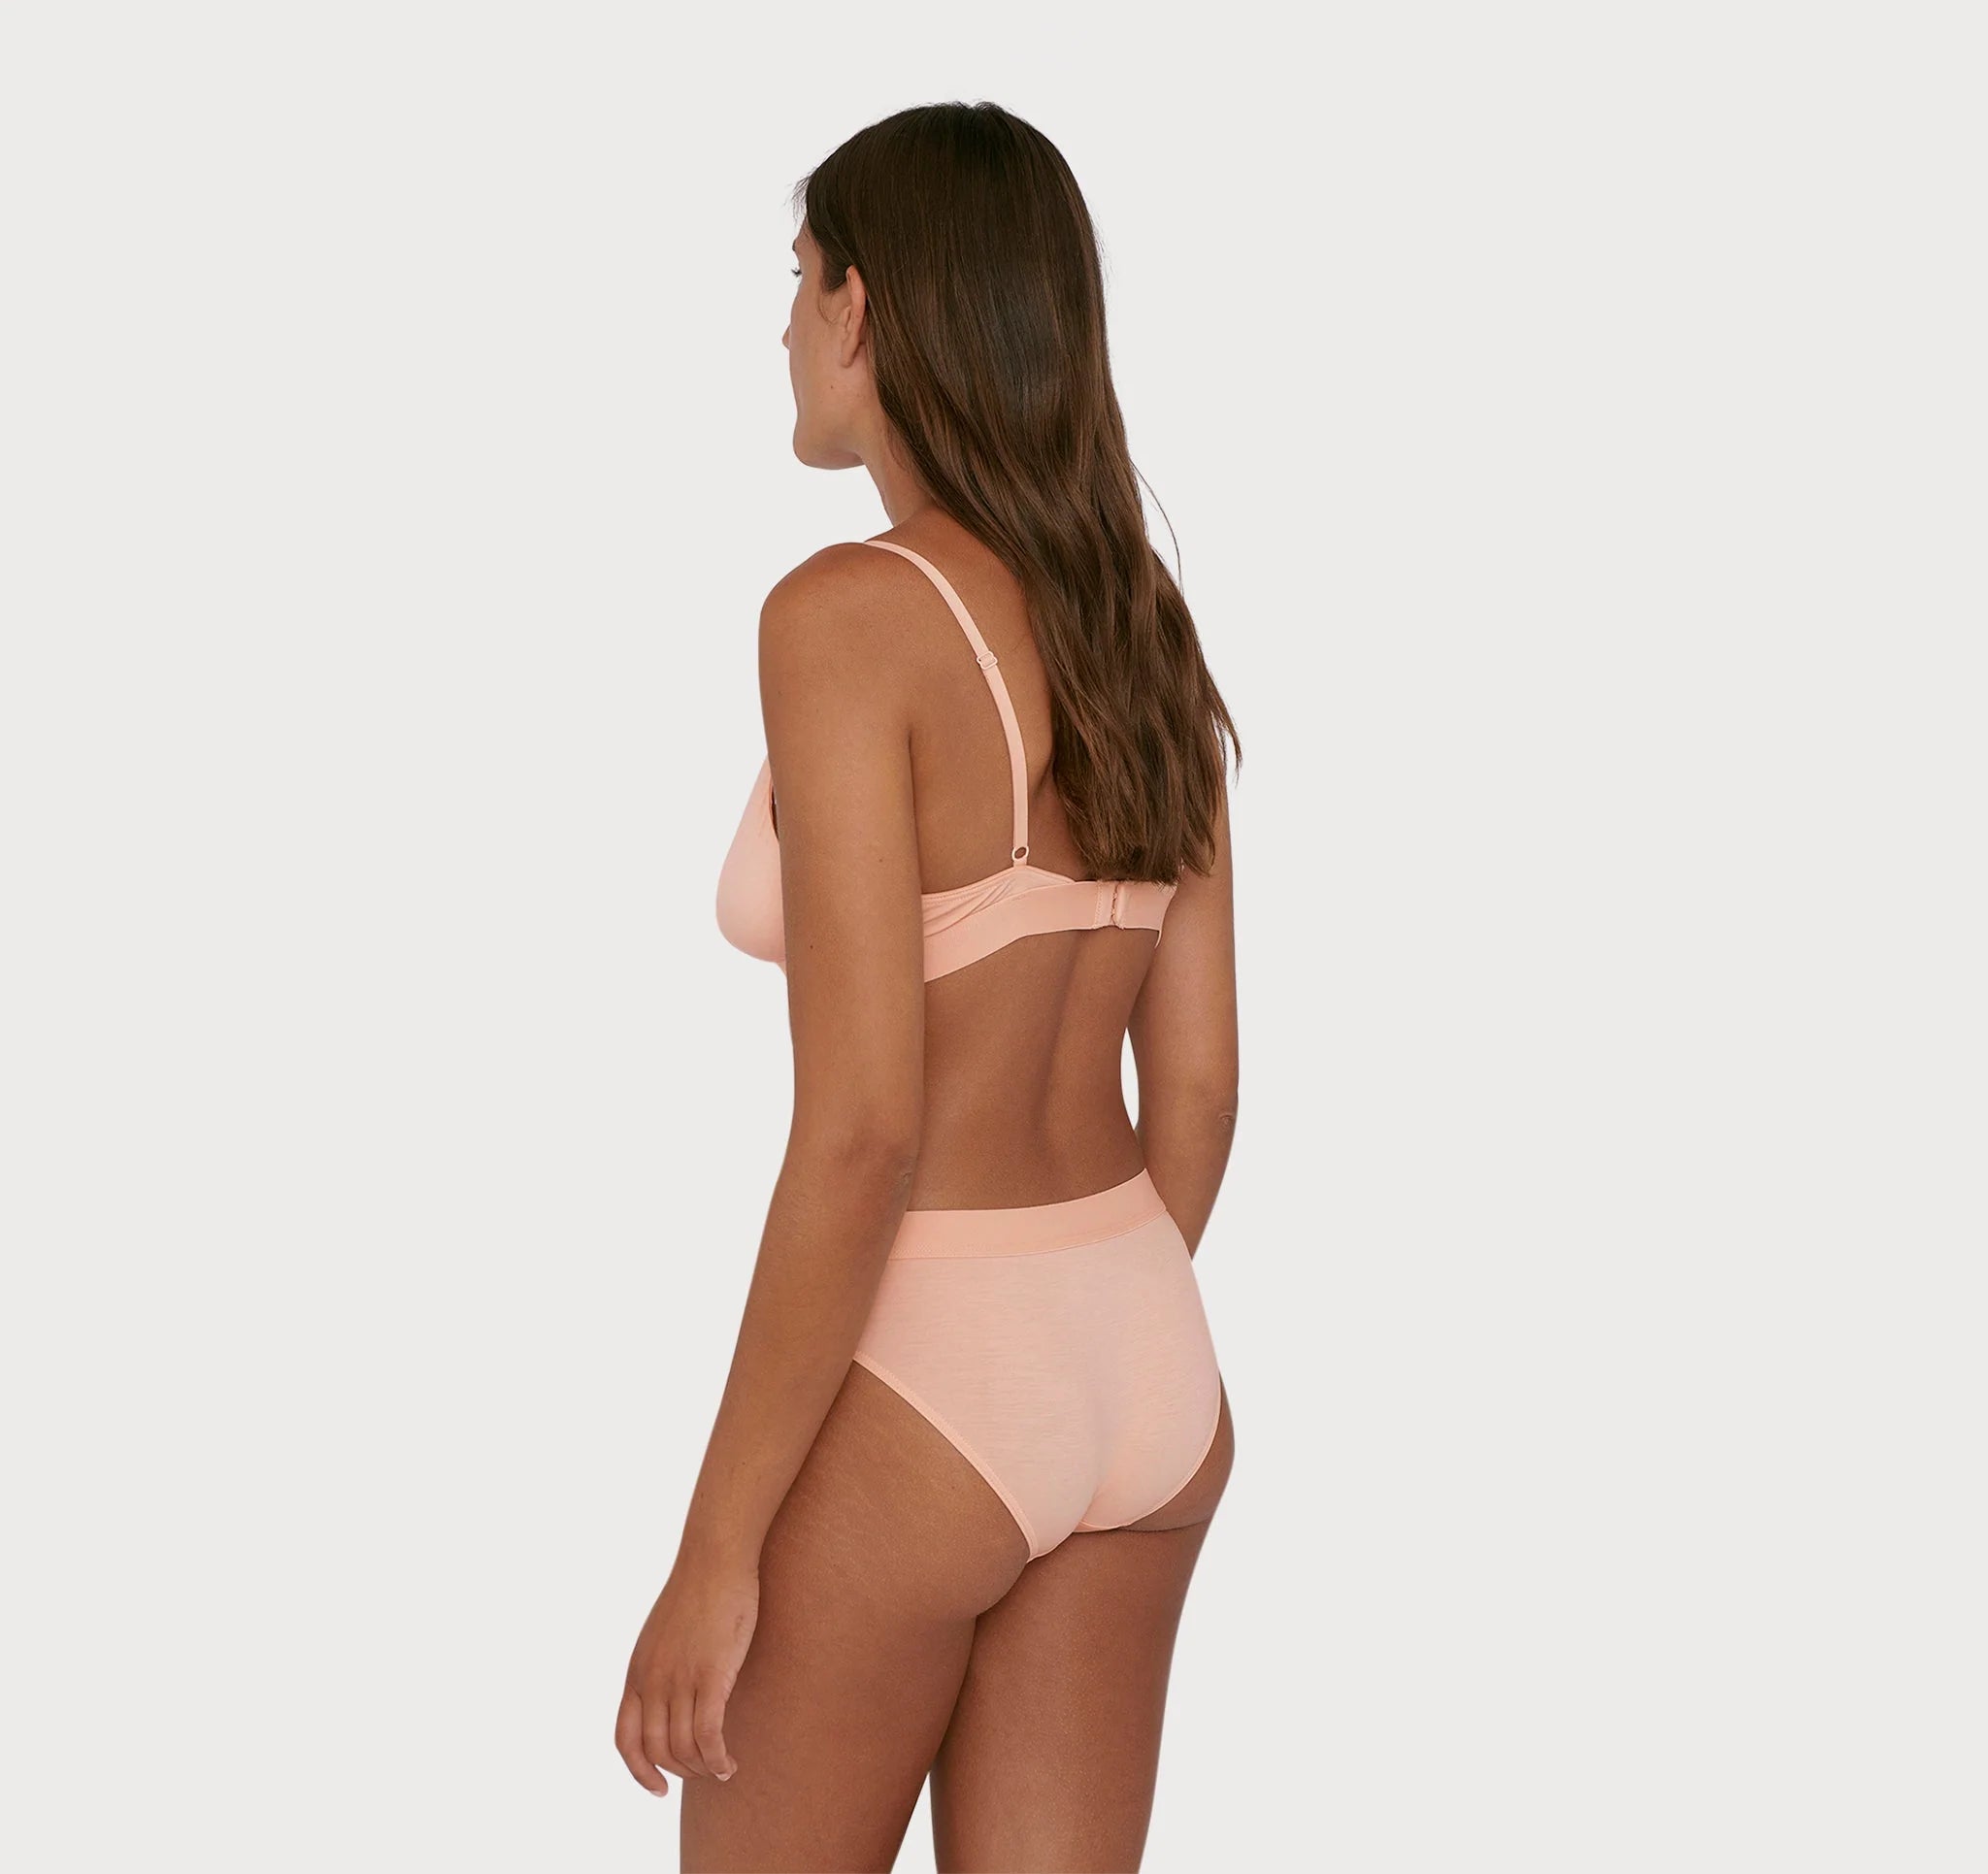 The back view of a woman in a comfortable Soft Touch Bralette - Soft Pink bikini by Organic Basics.